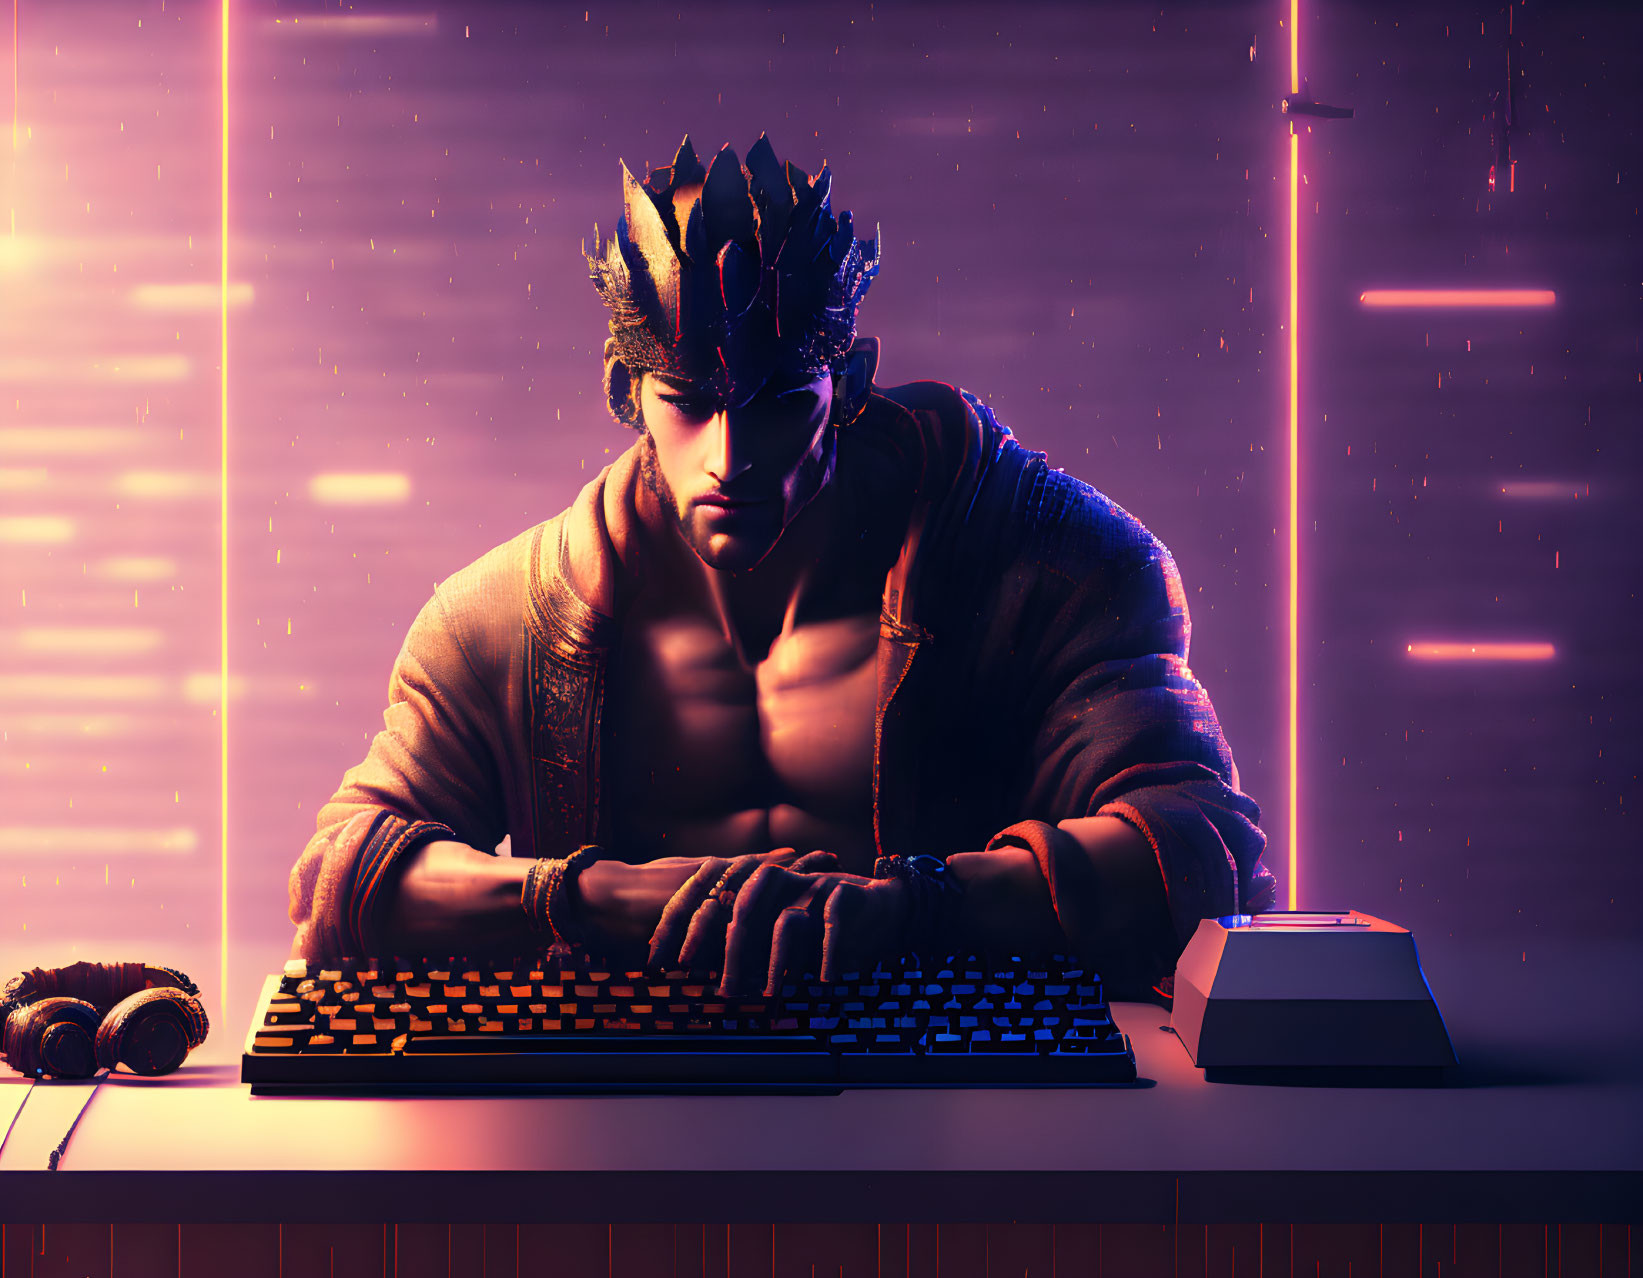 Person wearing crown types on glowing keyboard in futuristic room.